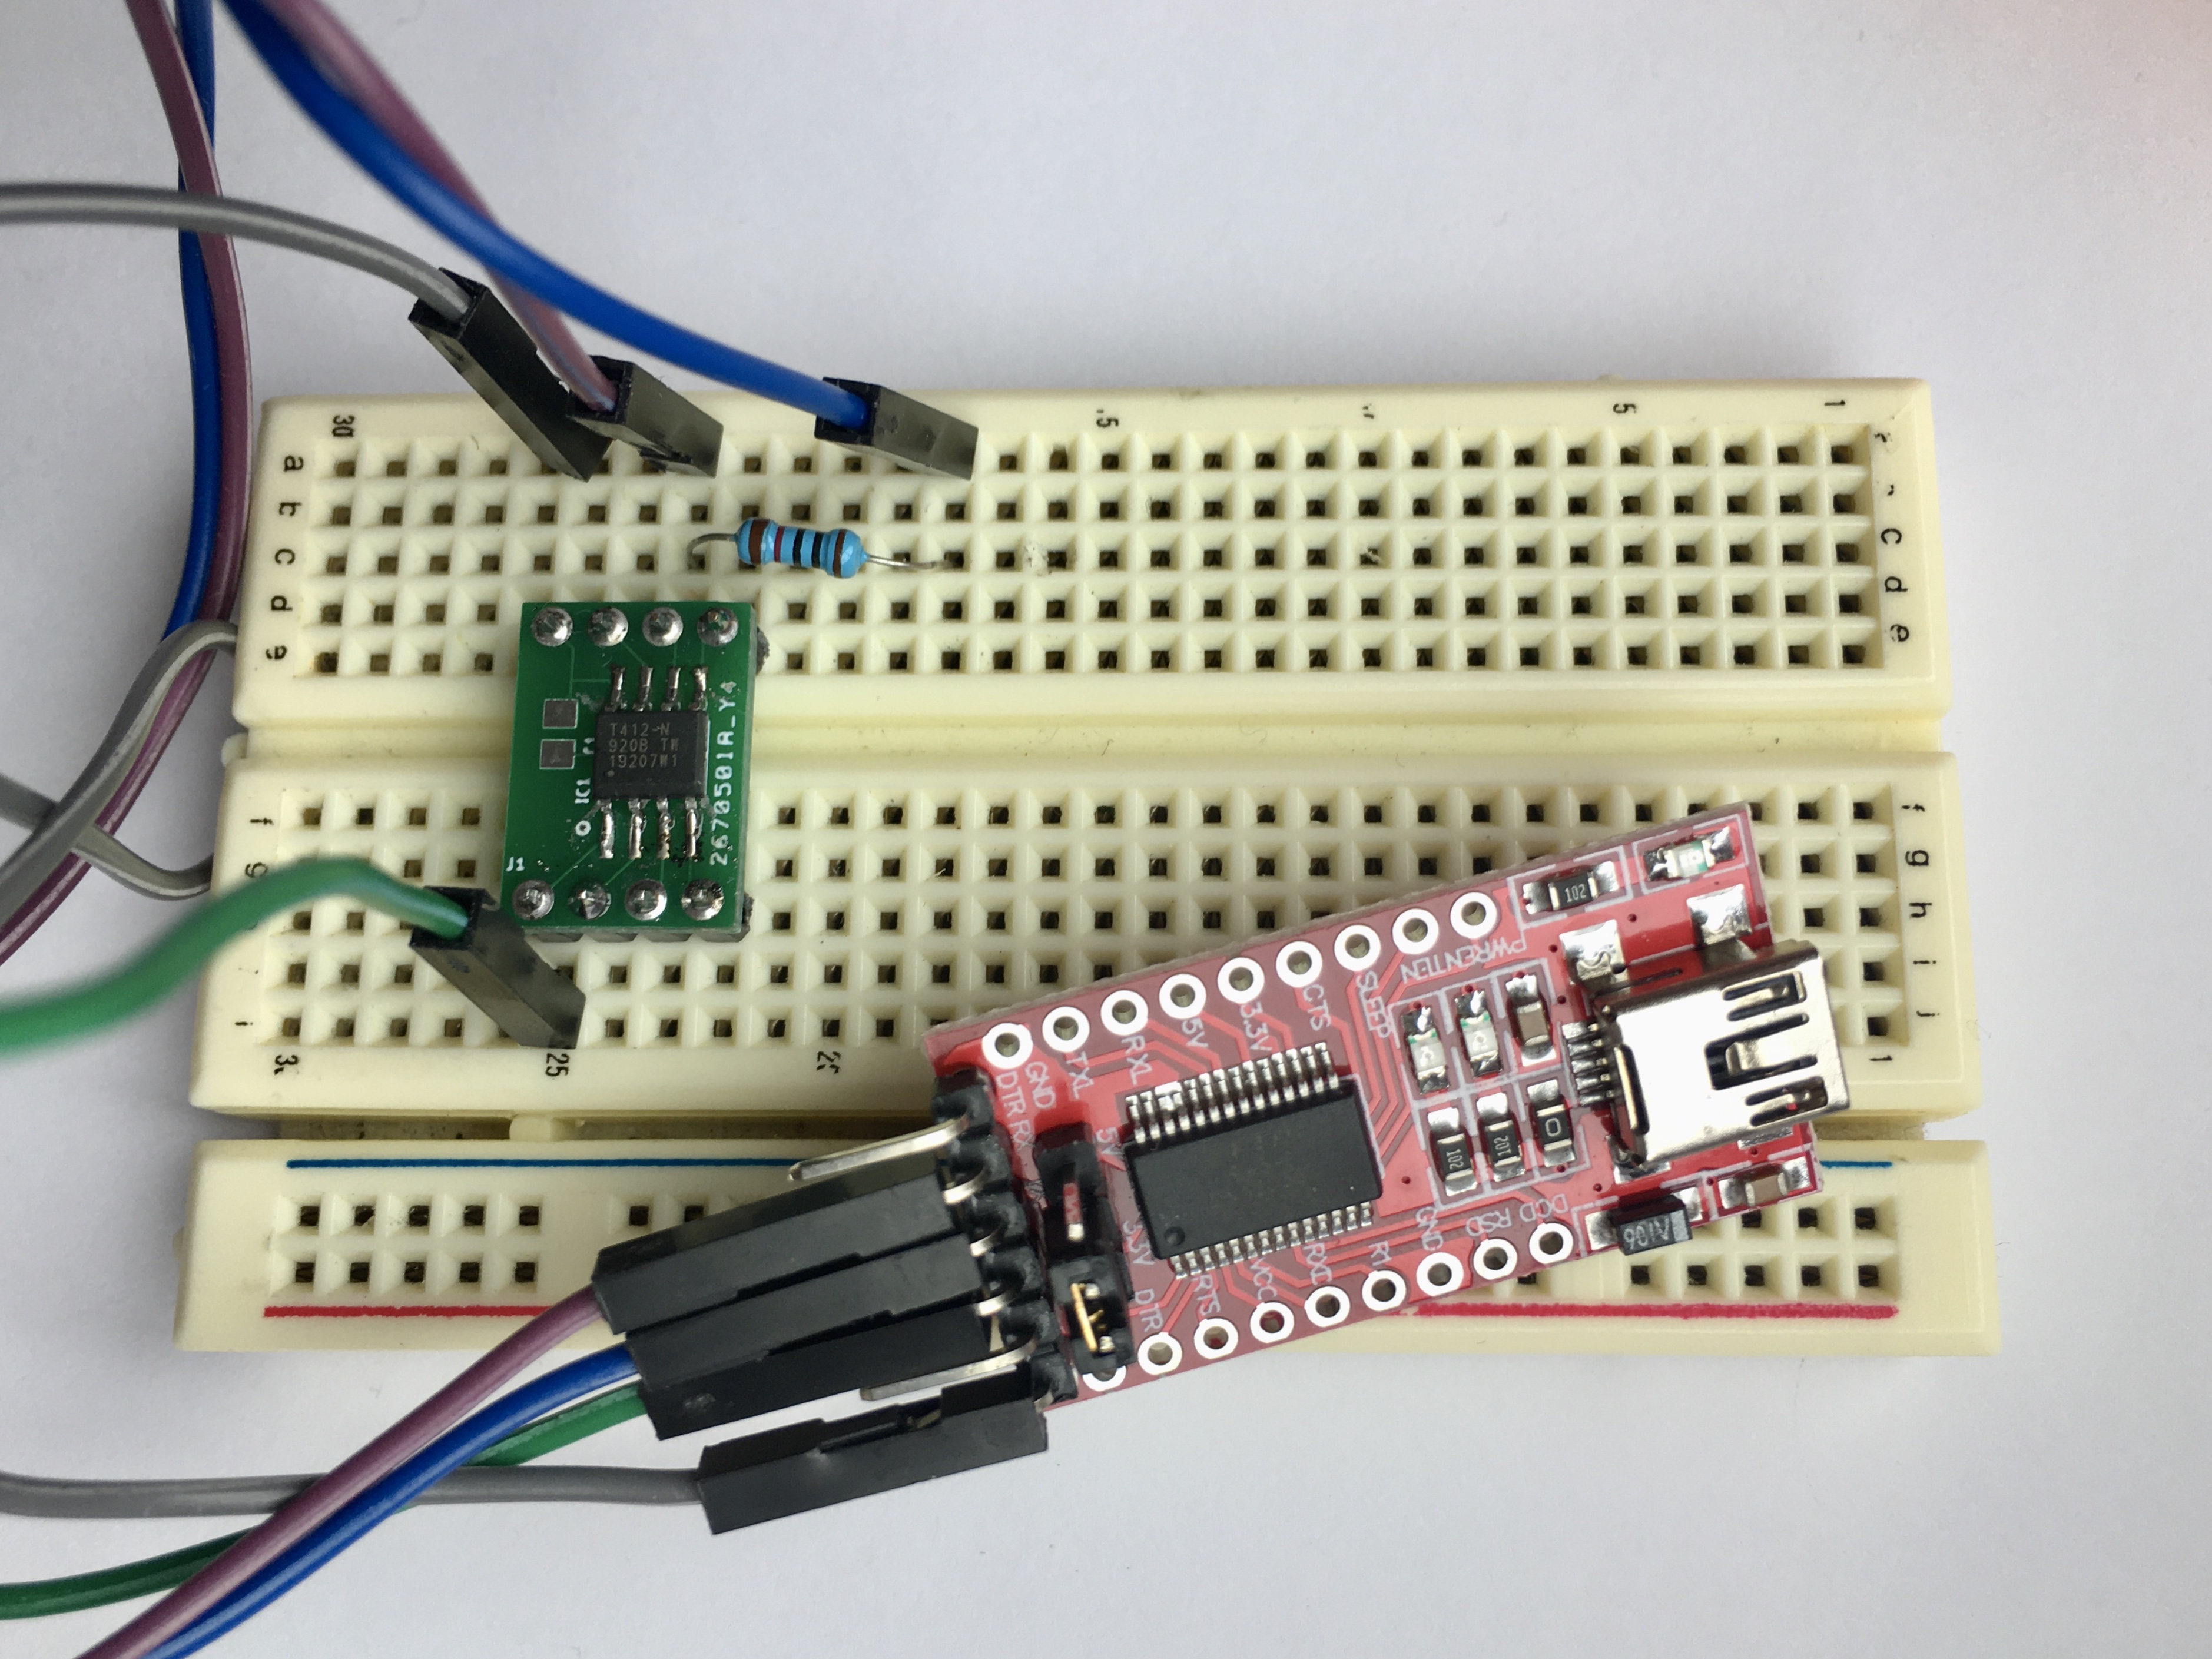 ATtiny412 connected to the USB to serial adapter